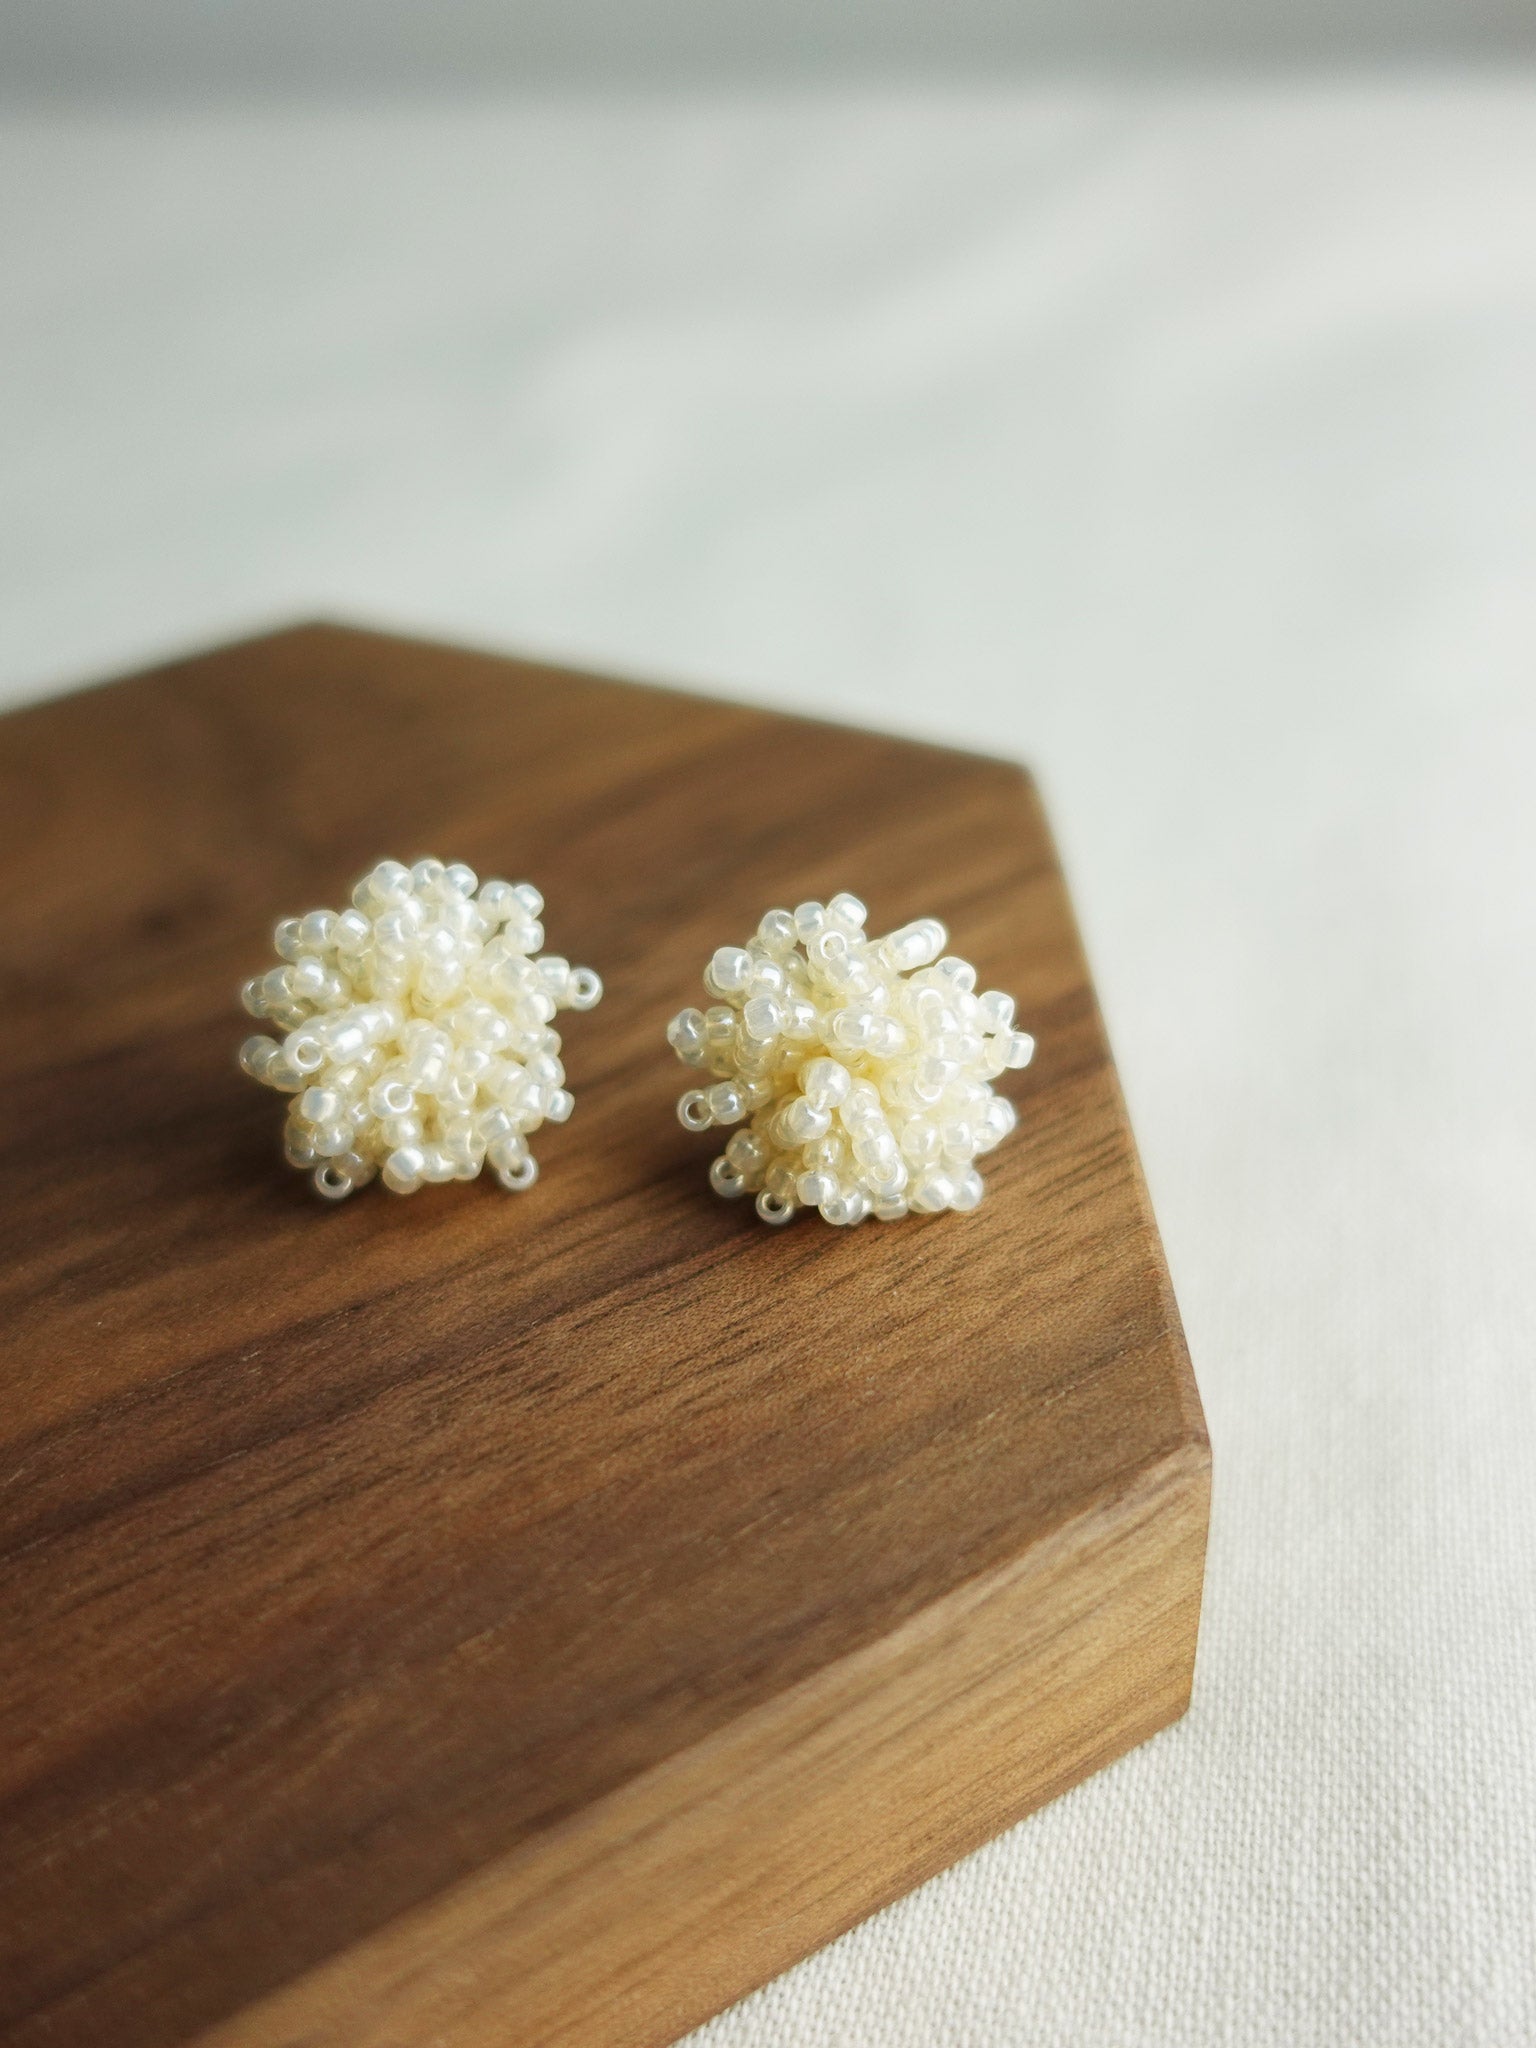 Fluffy Earrings in Ivory Display Close